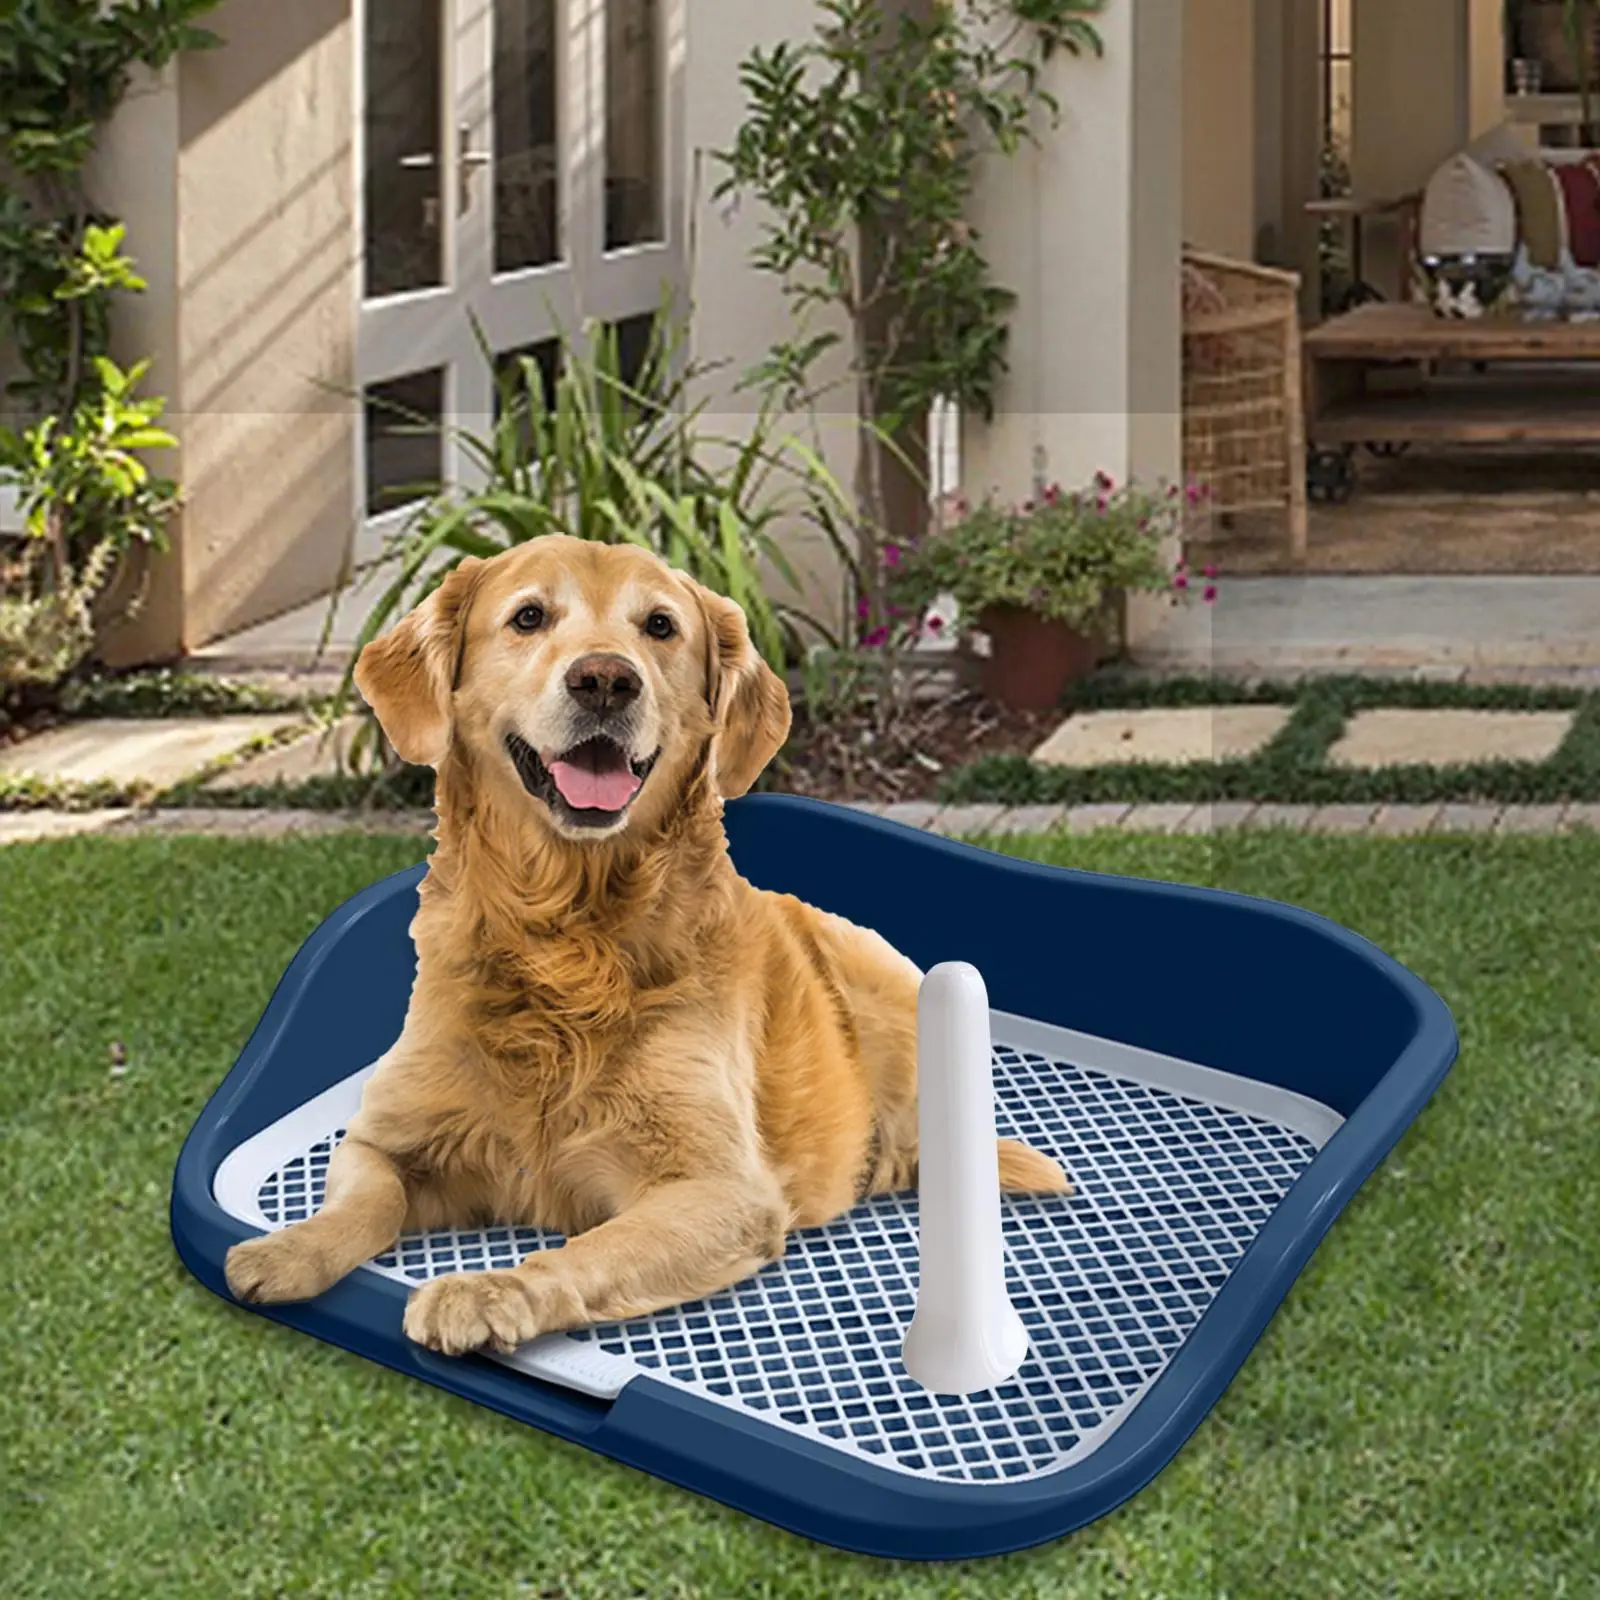 Large Dog Toilet Toilet with Screen Anti  Small Dog Urinal with Fence for Chinchilla Toilet Indoor